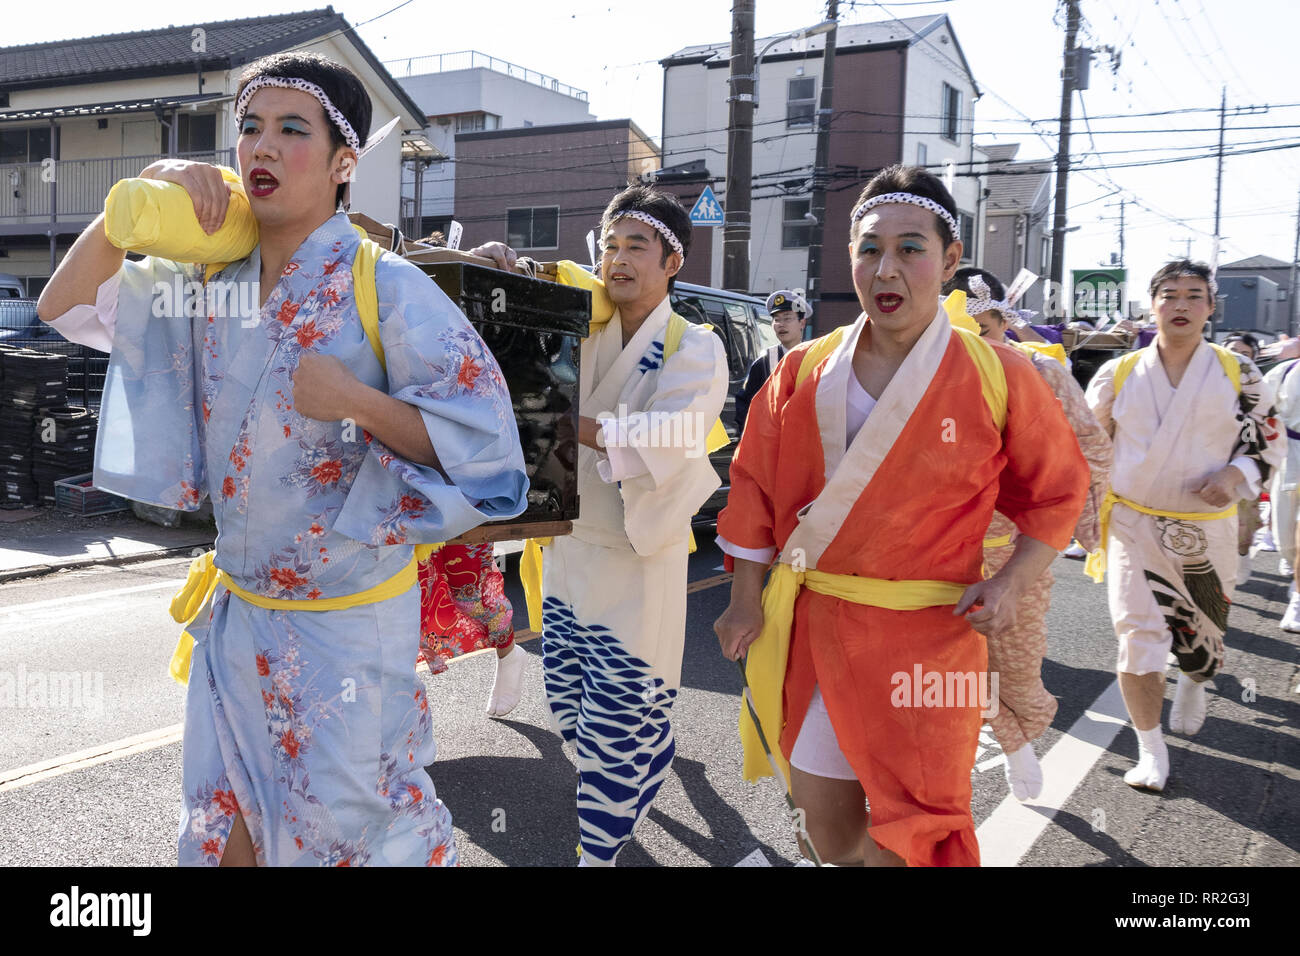 Tokyo, Japan. 24th Feb, 2019. Participants dressed in women's kimonos and  wearing makeup, run from house to house to chase away evil spirits during  the Ikazuchi no Daihannya festival. Festival volunteers carry